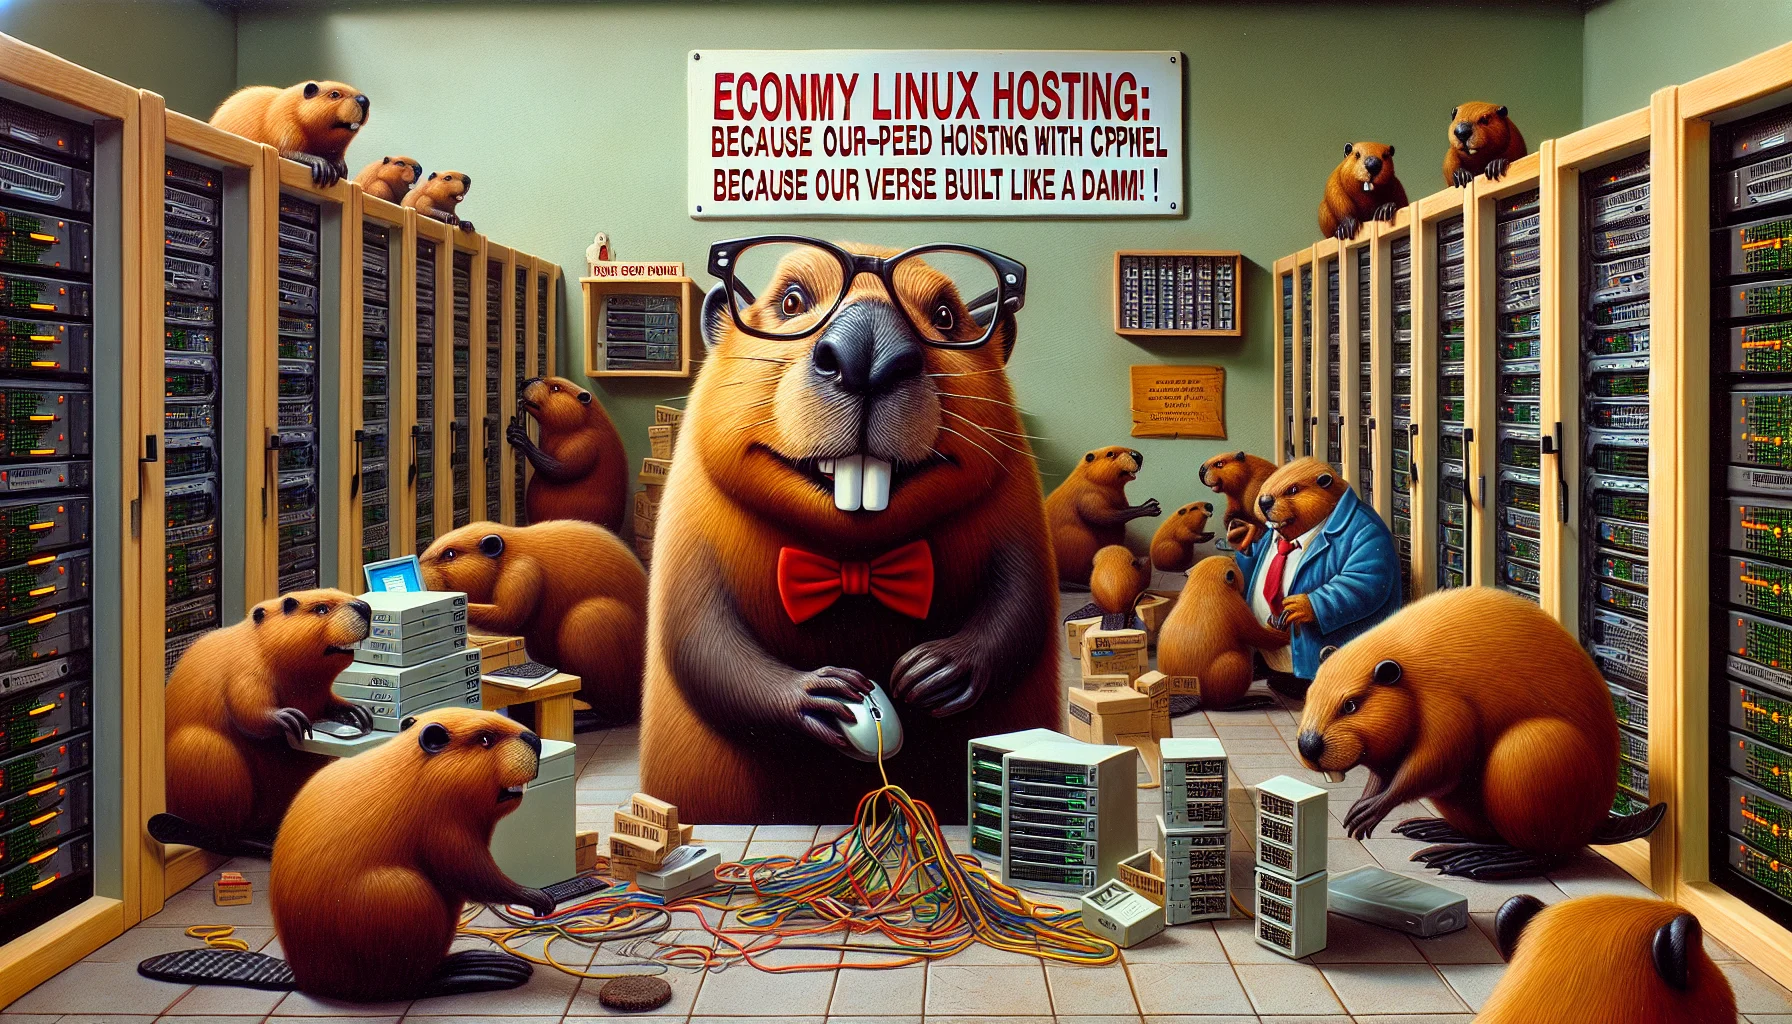 Imagine a humorous scenario where animals are portrayed as computer programmers, managing a server farm. A crowd of diligent beavers, known for their natural building abilities, are managing Economy Linux Hosting with cPanel. In the center, a beaver wearing thick glasses and a bowtie is standing on its hind legs, clicking a mouse connected to a computer. Other beavers are arranging wires and inspecting server systems. The scene is abuzz with activity, echoing the busy online world. A sign on the wall humorously reads: 'High-speed hosting: Because our servers are built like a dam!'. Note: All components must be painted in a realistic manner.